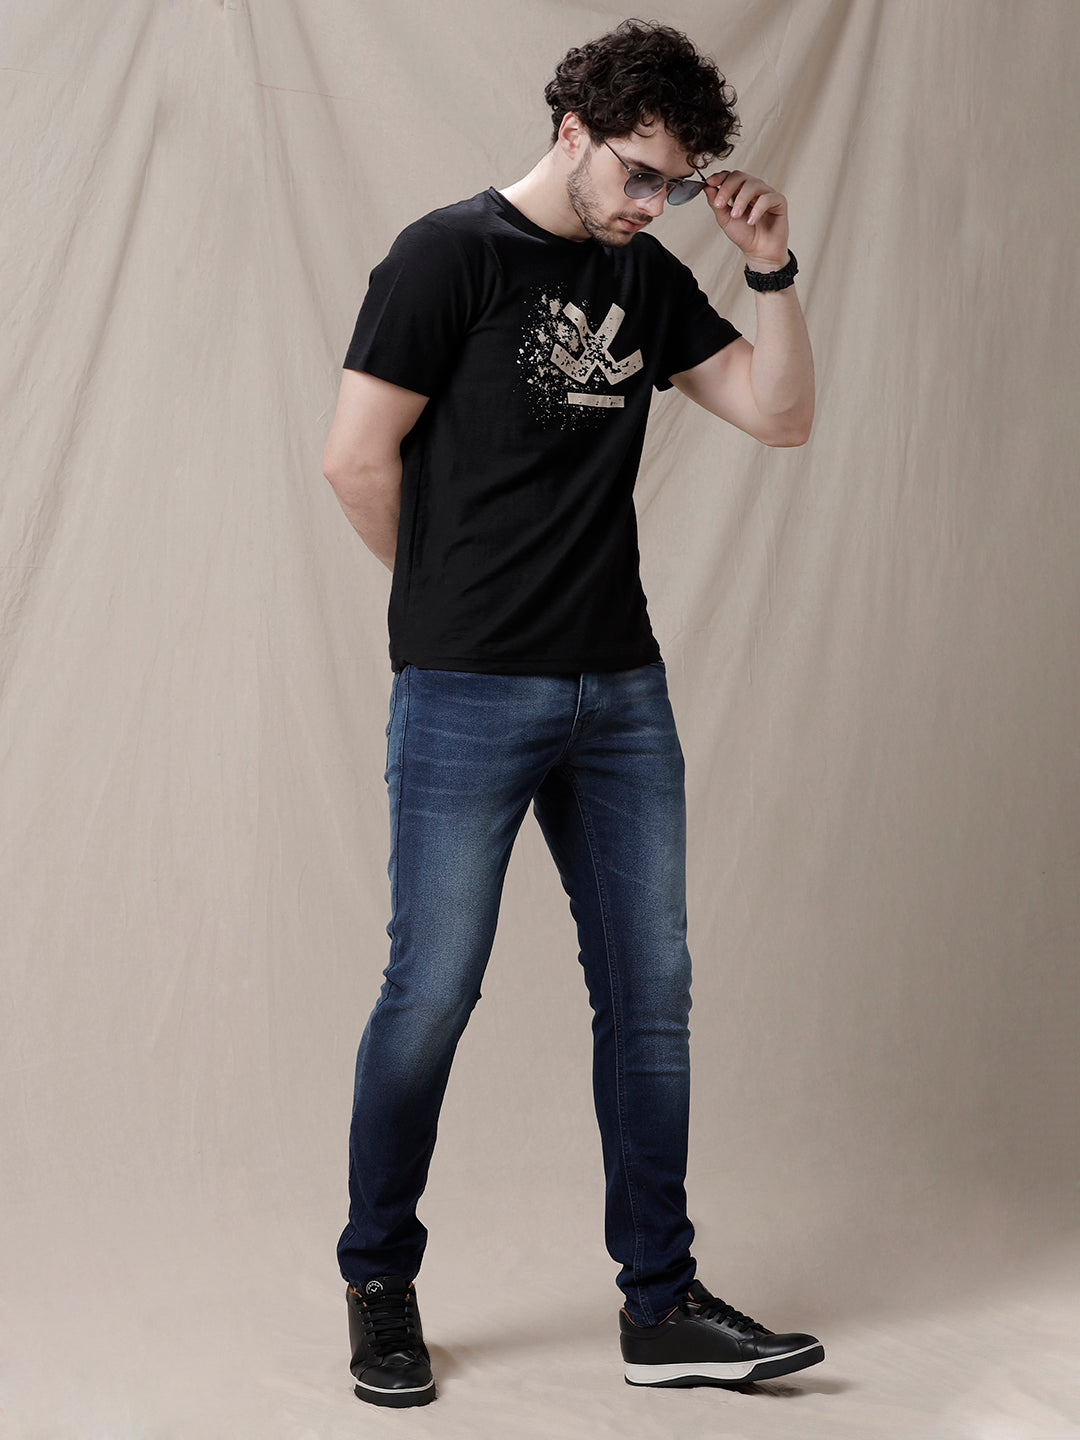 Blue Faded Chic Slim Fit Jeans